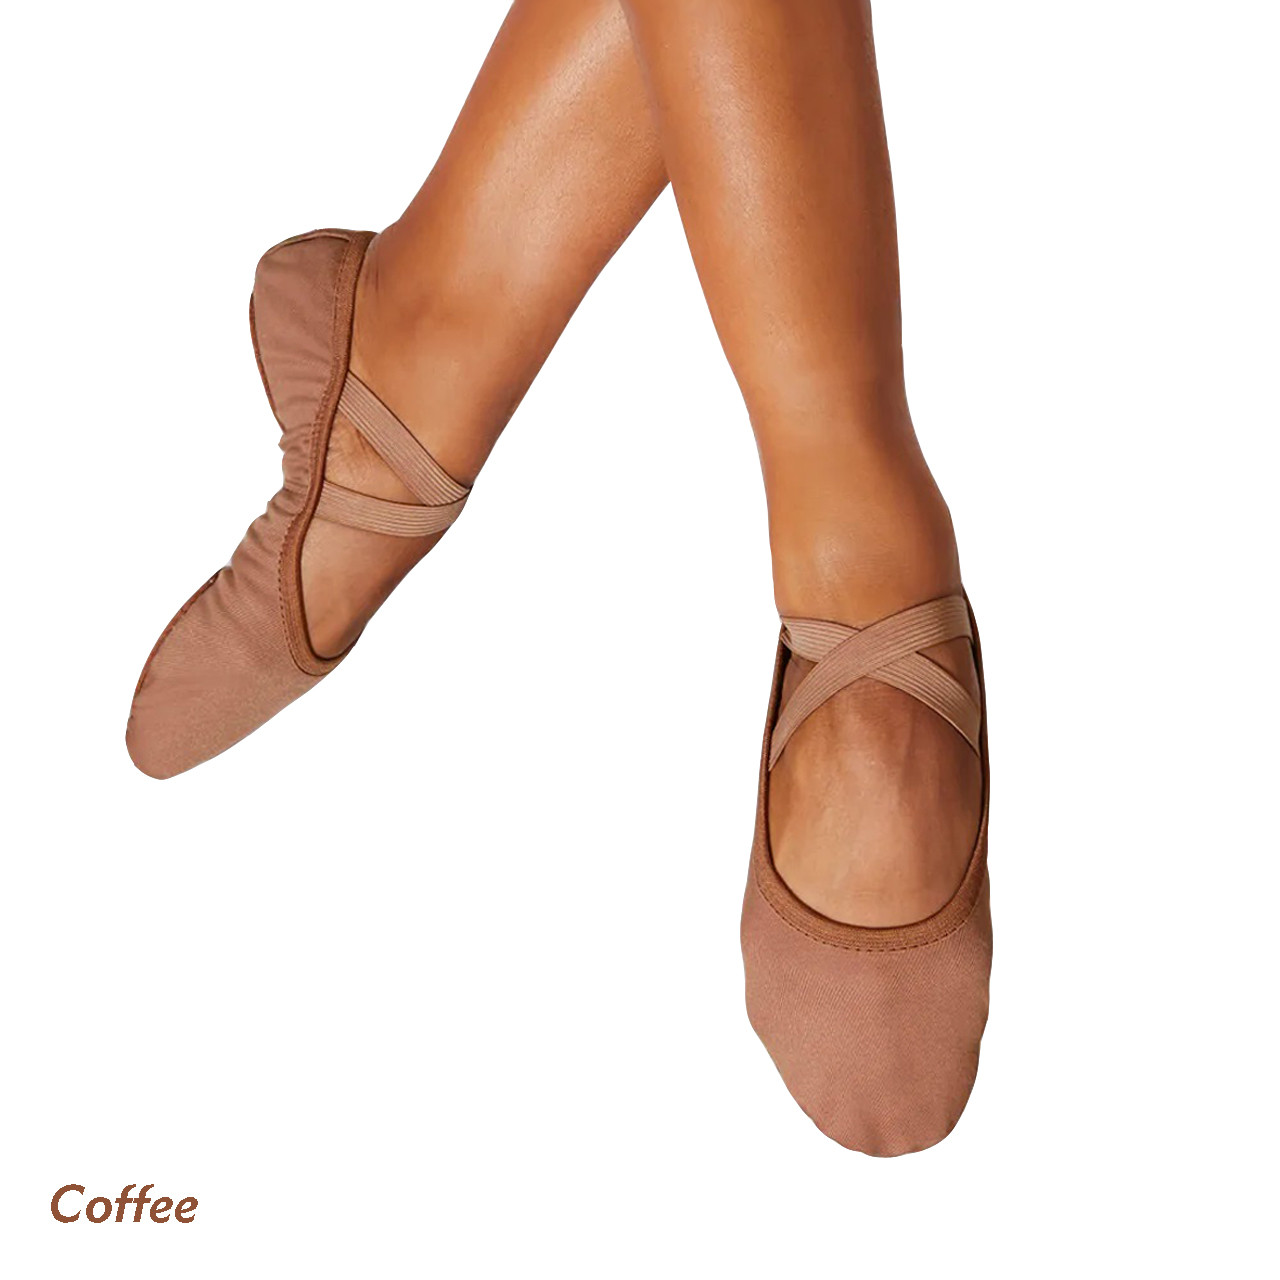 Demi-pointes Perfoma BLOCH S0284L - TEATRICAL PINK en toile stretch